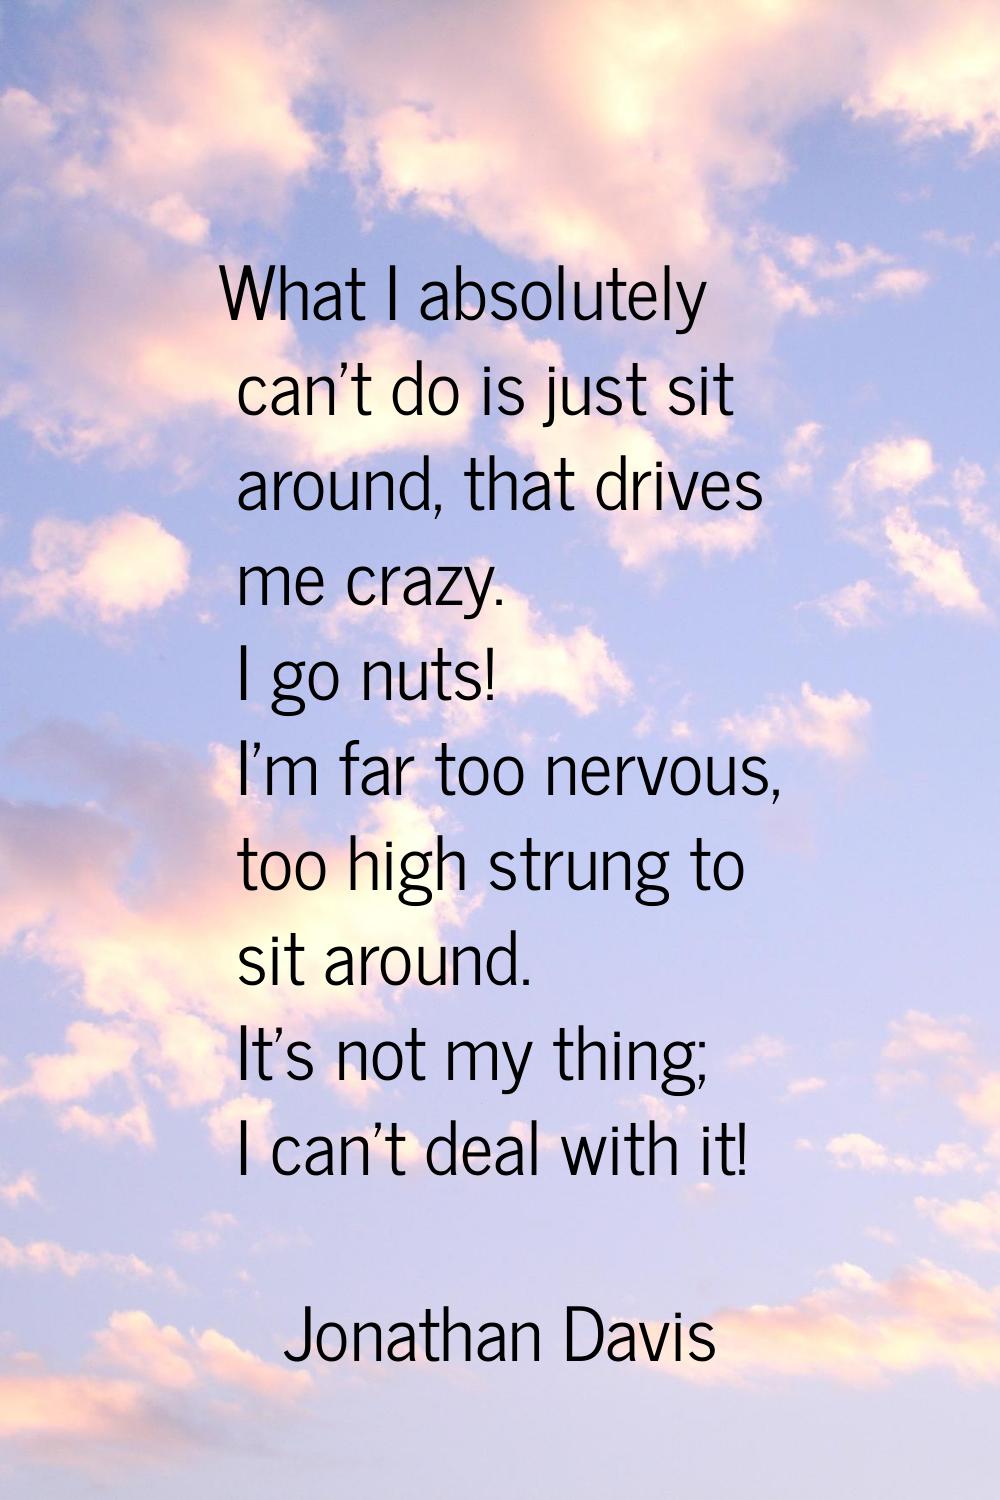 What I absolutely can't do is just sit around, that drives me crazy. I go nuts! I'm far too nervous